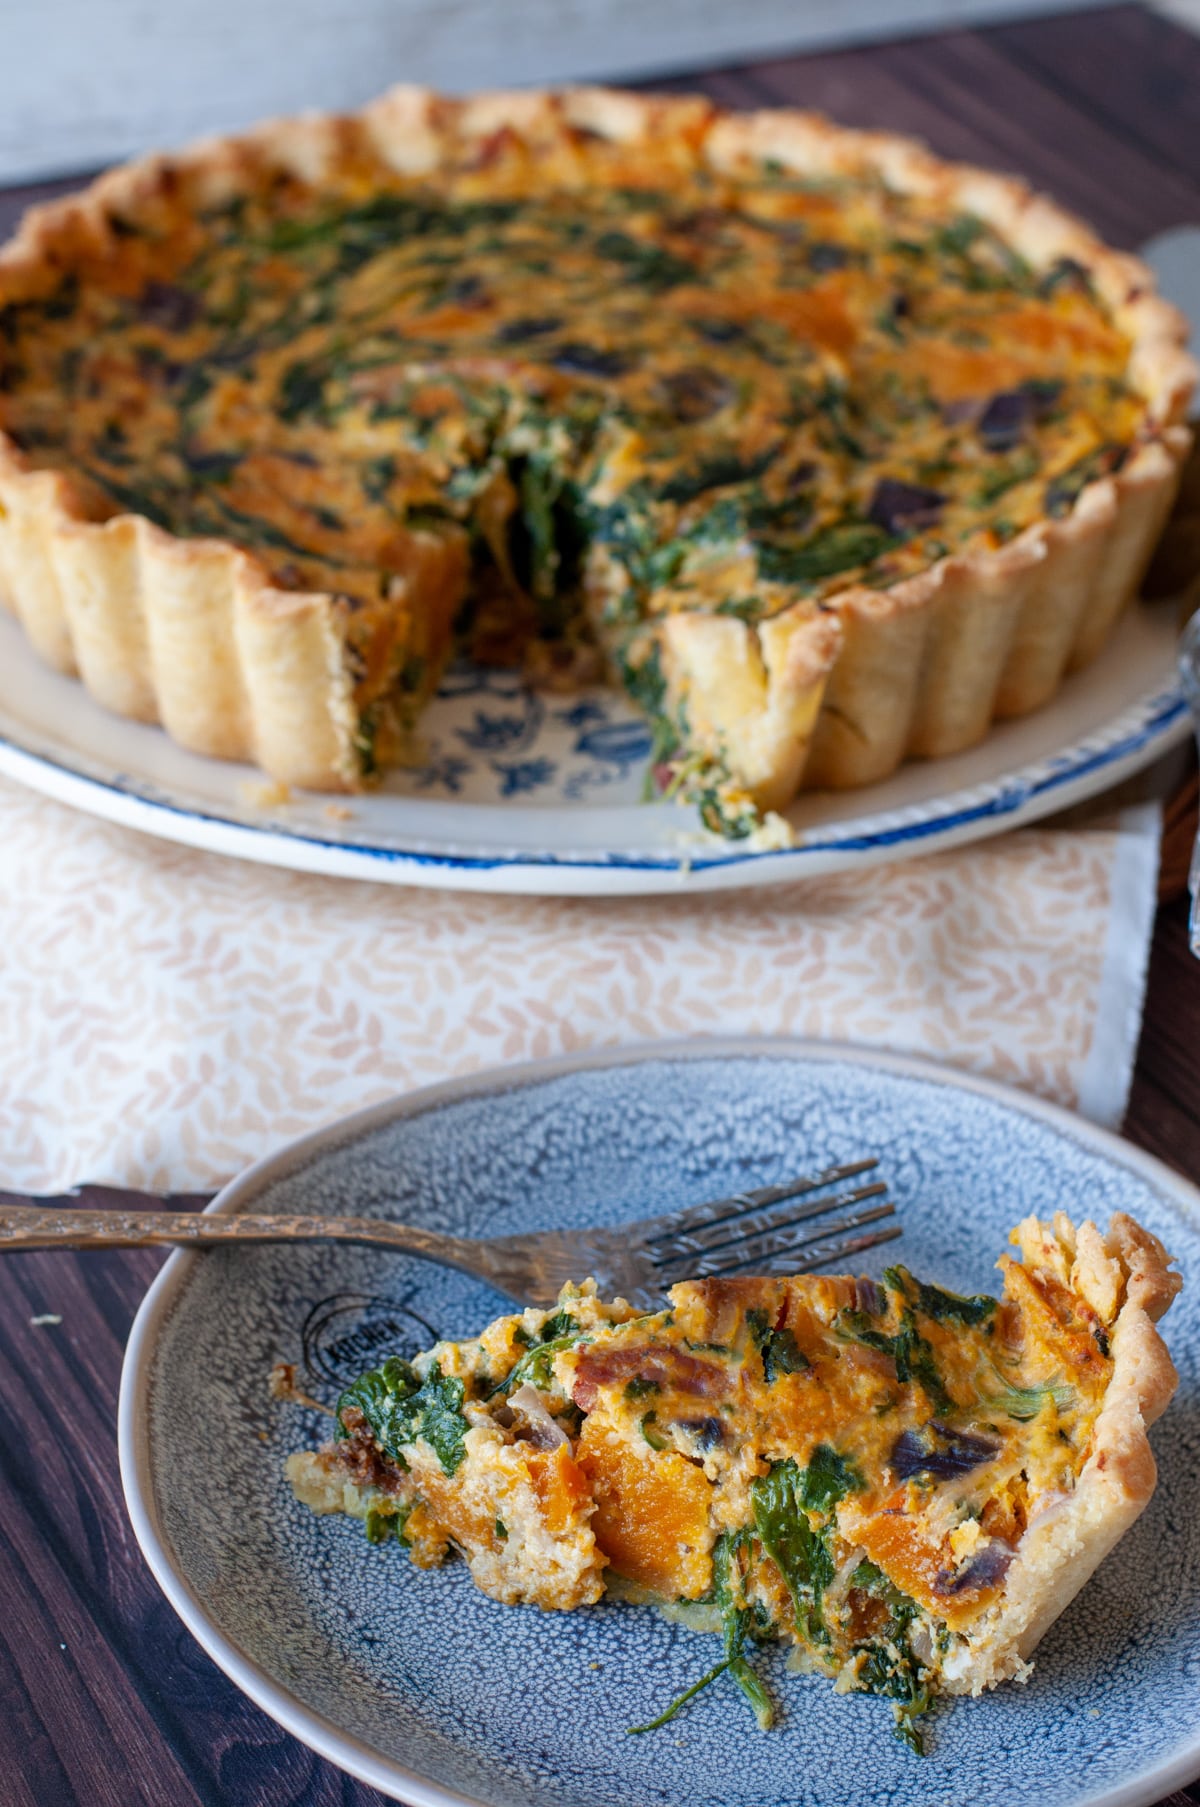 Italian Spinach Ricotta Pie With Caramelized Squash